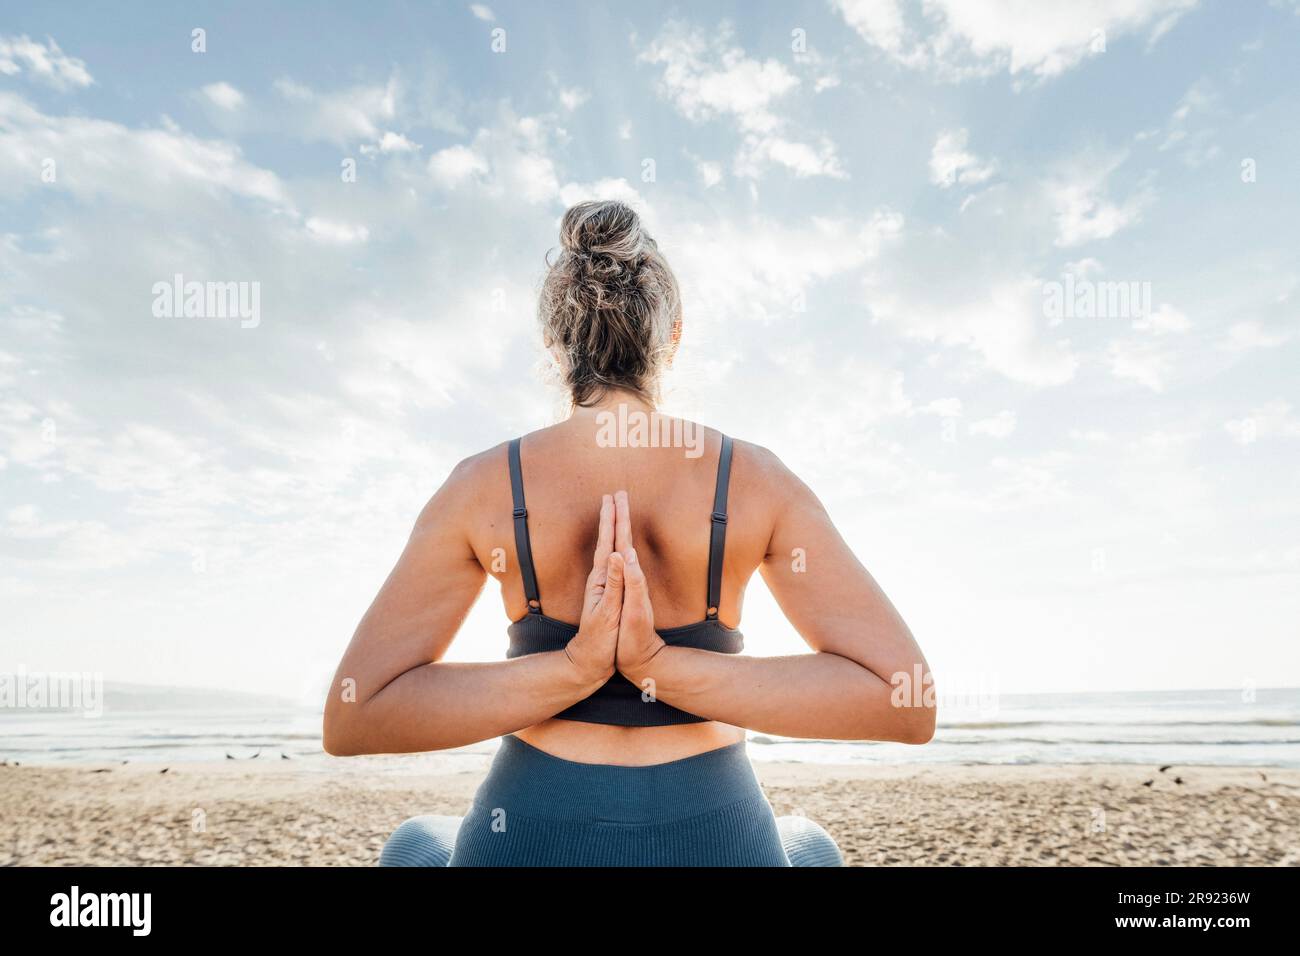 Woman practicing yoga with hands clasped behind back sitting at beach Stock Photo